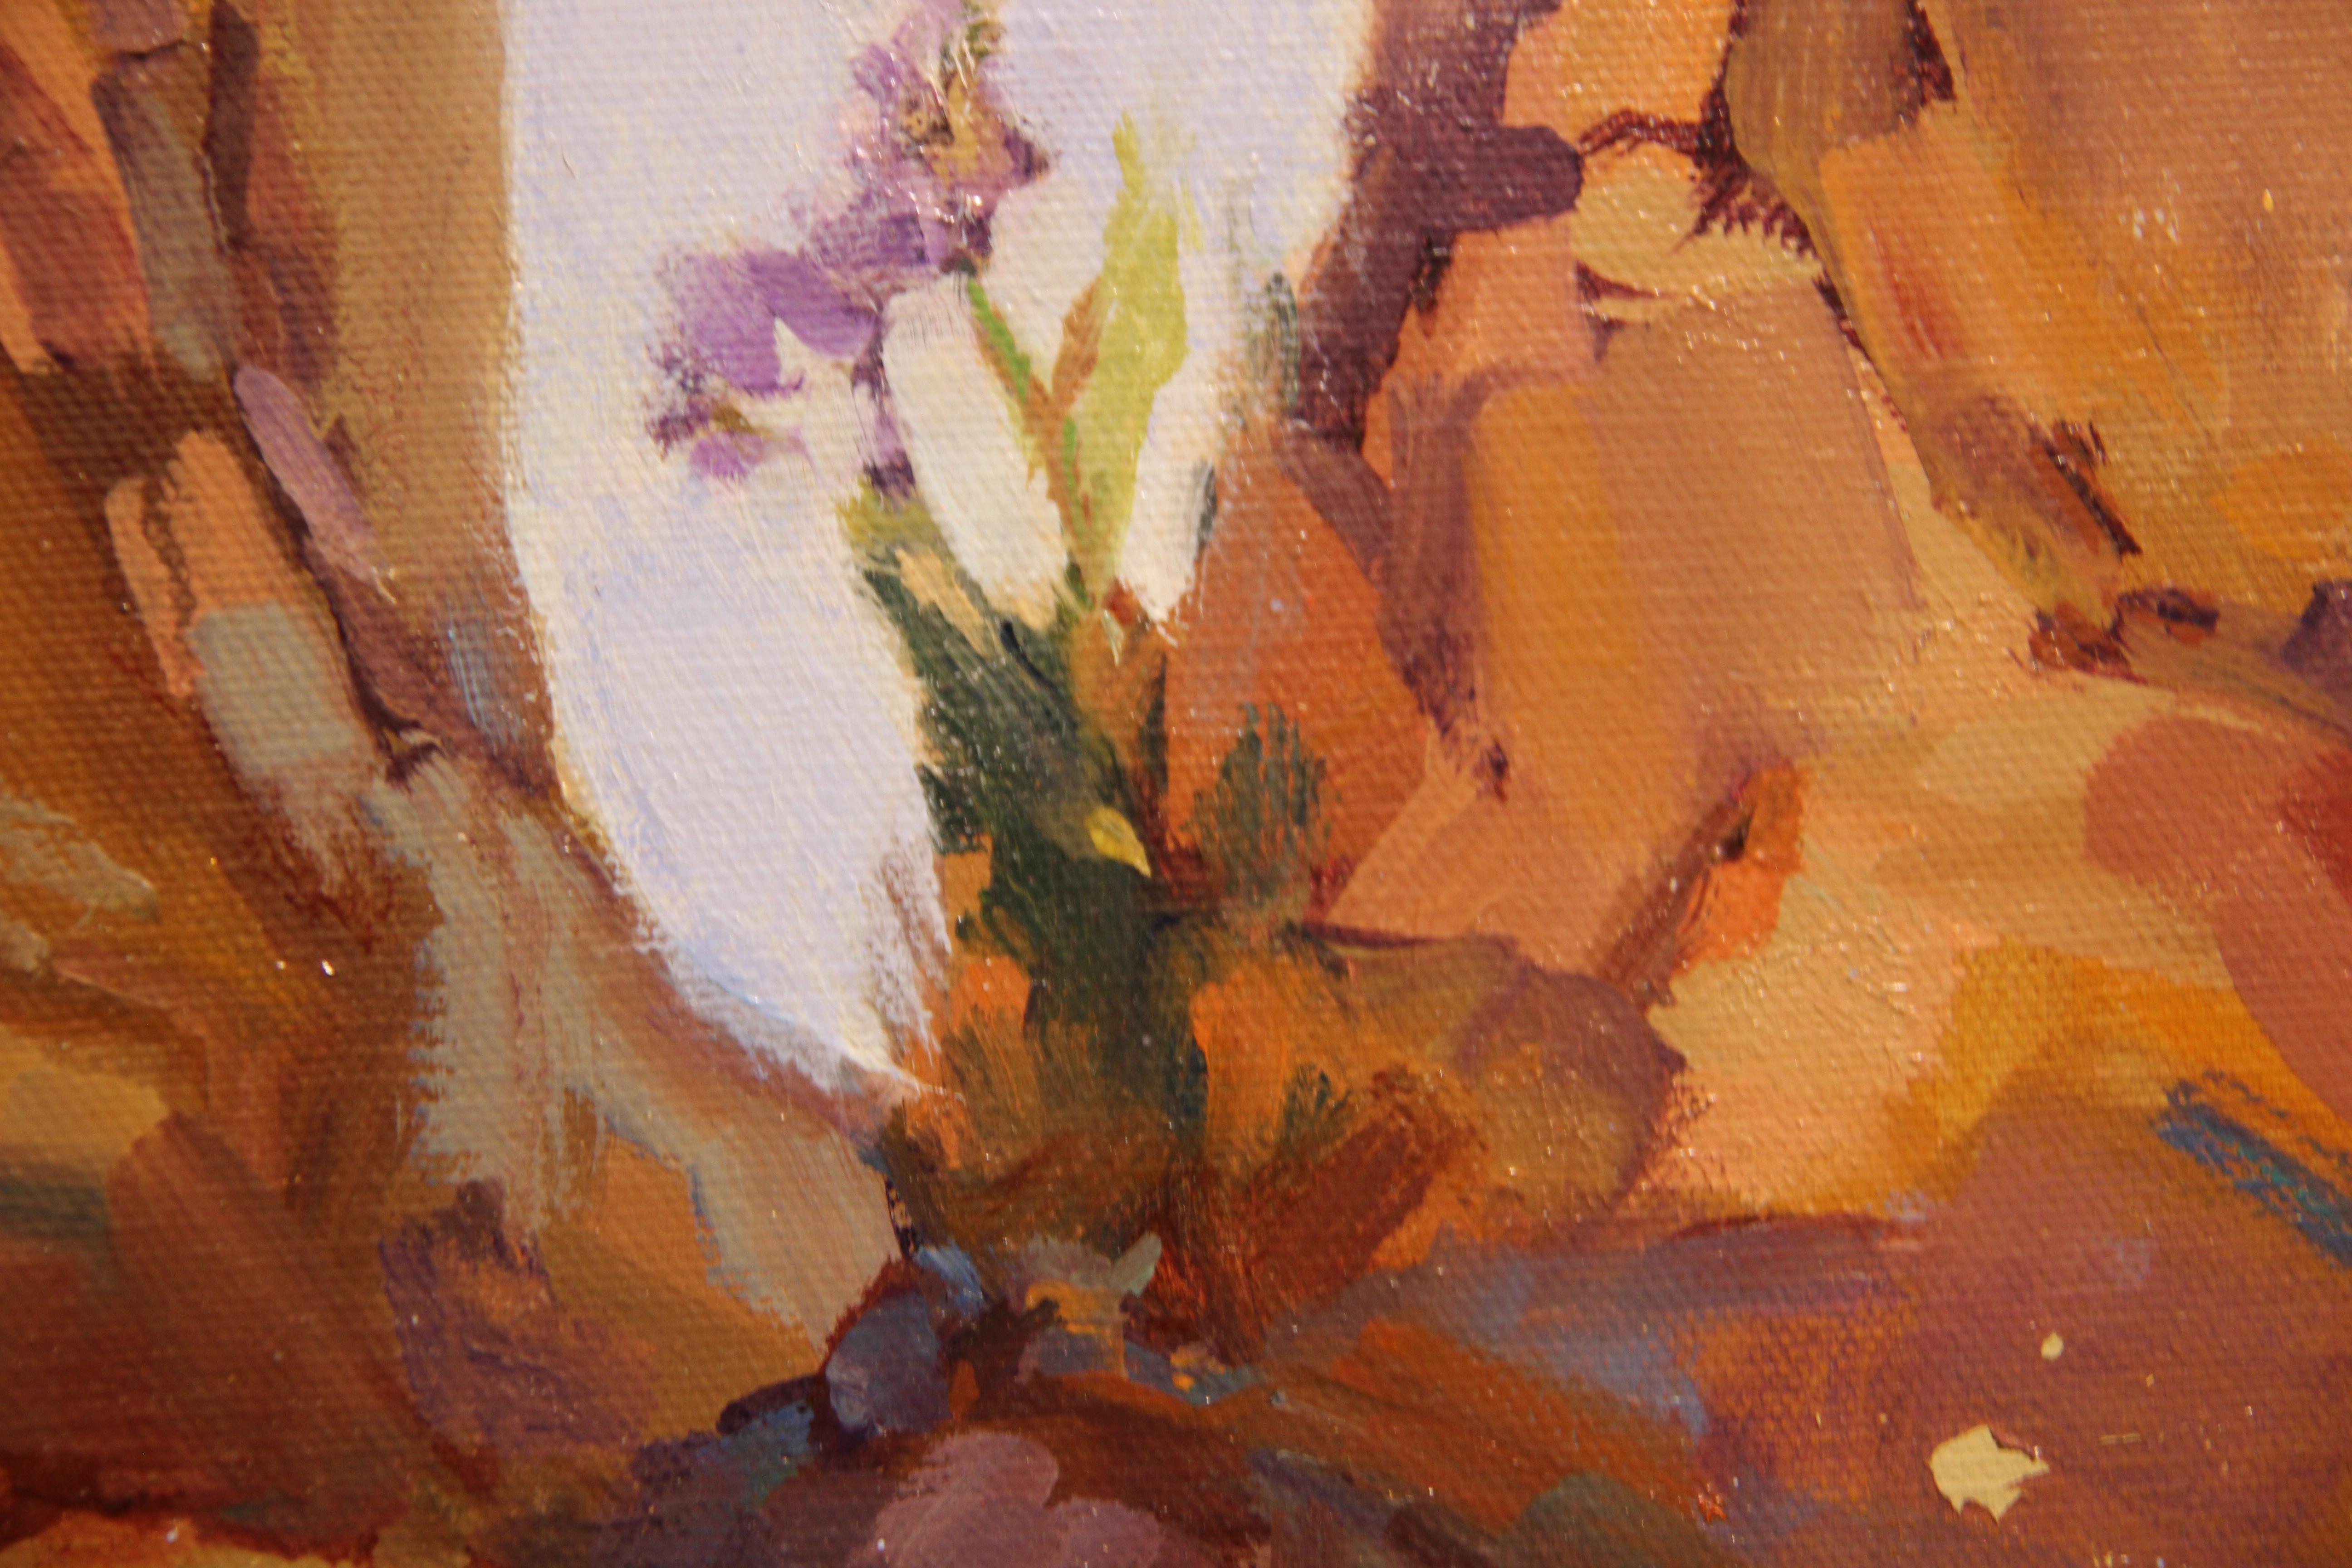 Warm toned impressionist landscape oil painting depicting rocky and arid Southwestern desert with purple flowers by artist L. Williams. Signed in lower right corner and hung in a dark wood frame. 

Dimensions Without Frame: H 20 in. x W 24 in. 